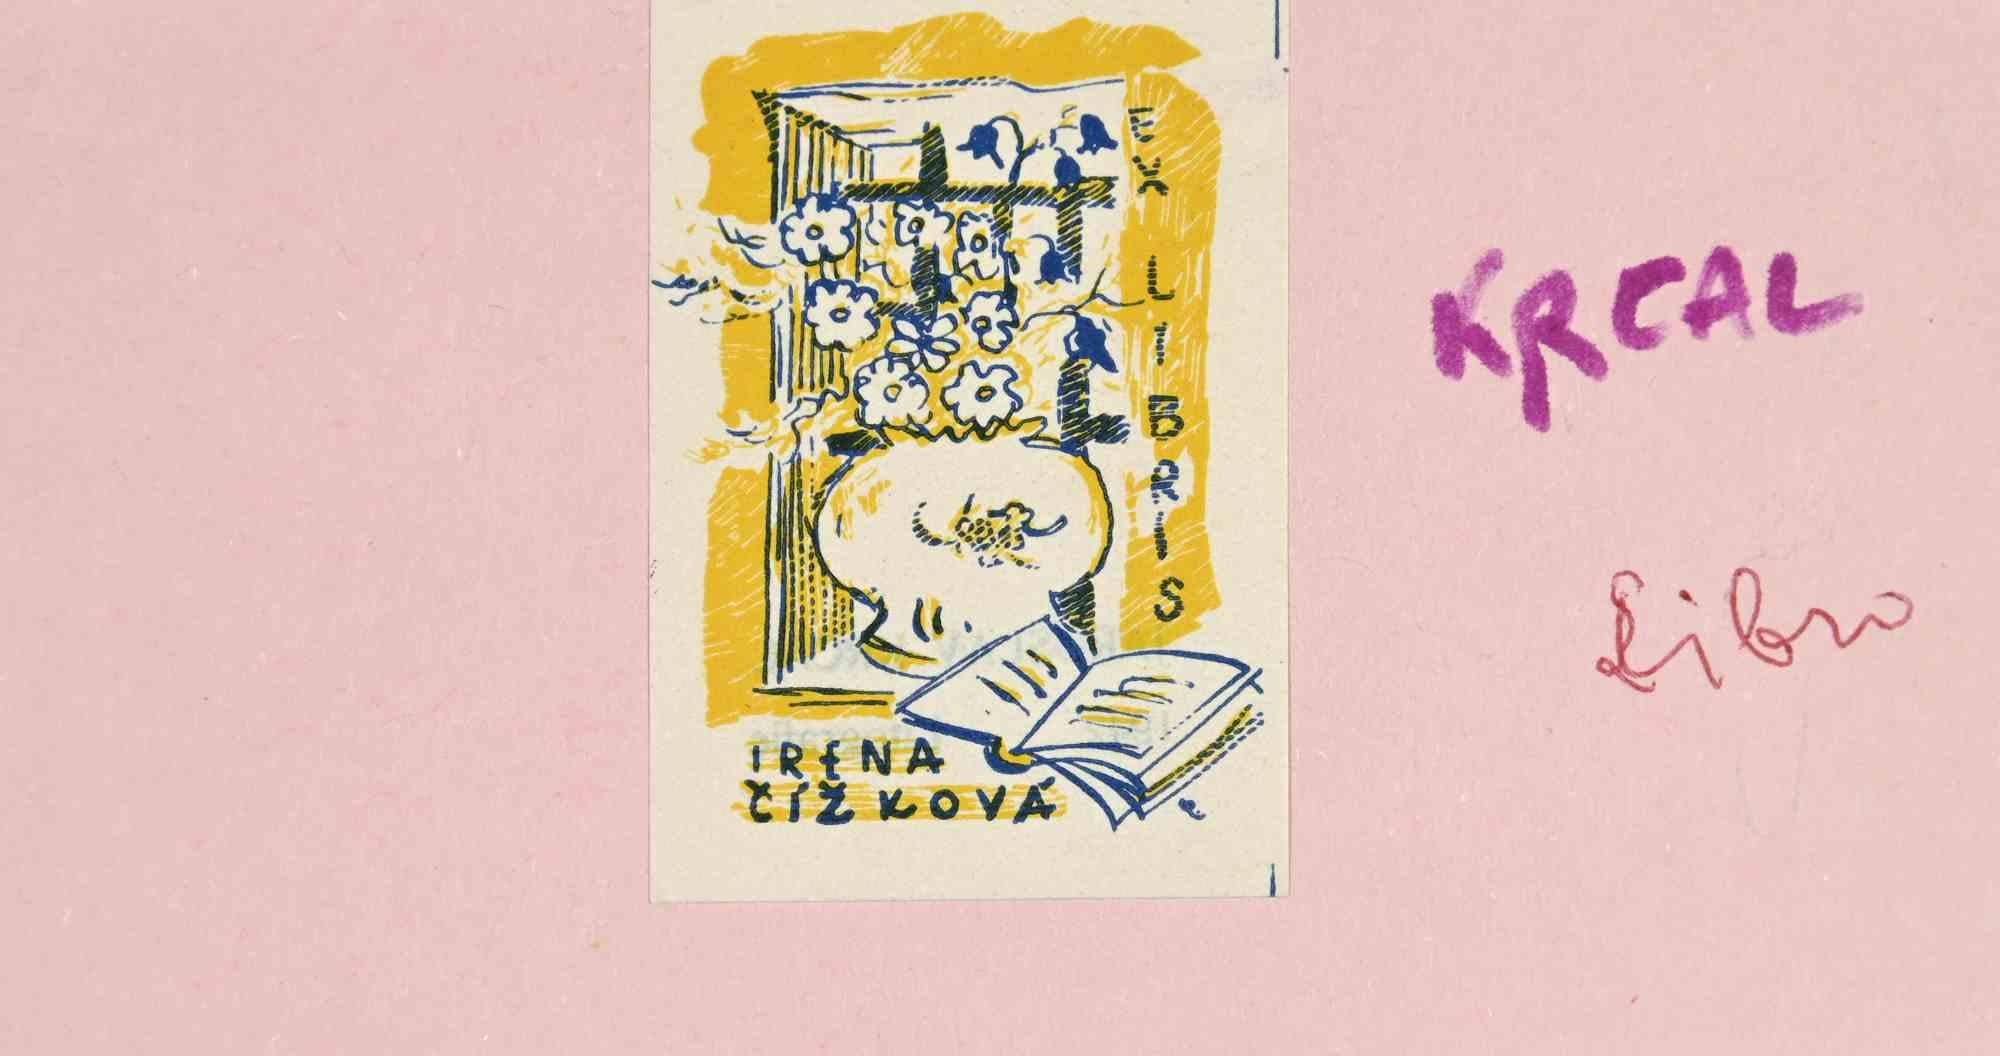 Ex Libris - Irena Cìžkovà is an Artwork realized in 1942 s. by the Artist Jaroslav Krcal.

Lithograph print on paper. Signed on plate and dated on back.

The work is glued on pink cardboard.

Total dimensions: 8x15 cm.

Good conditions.

The artist